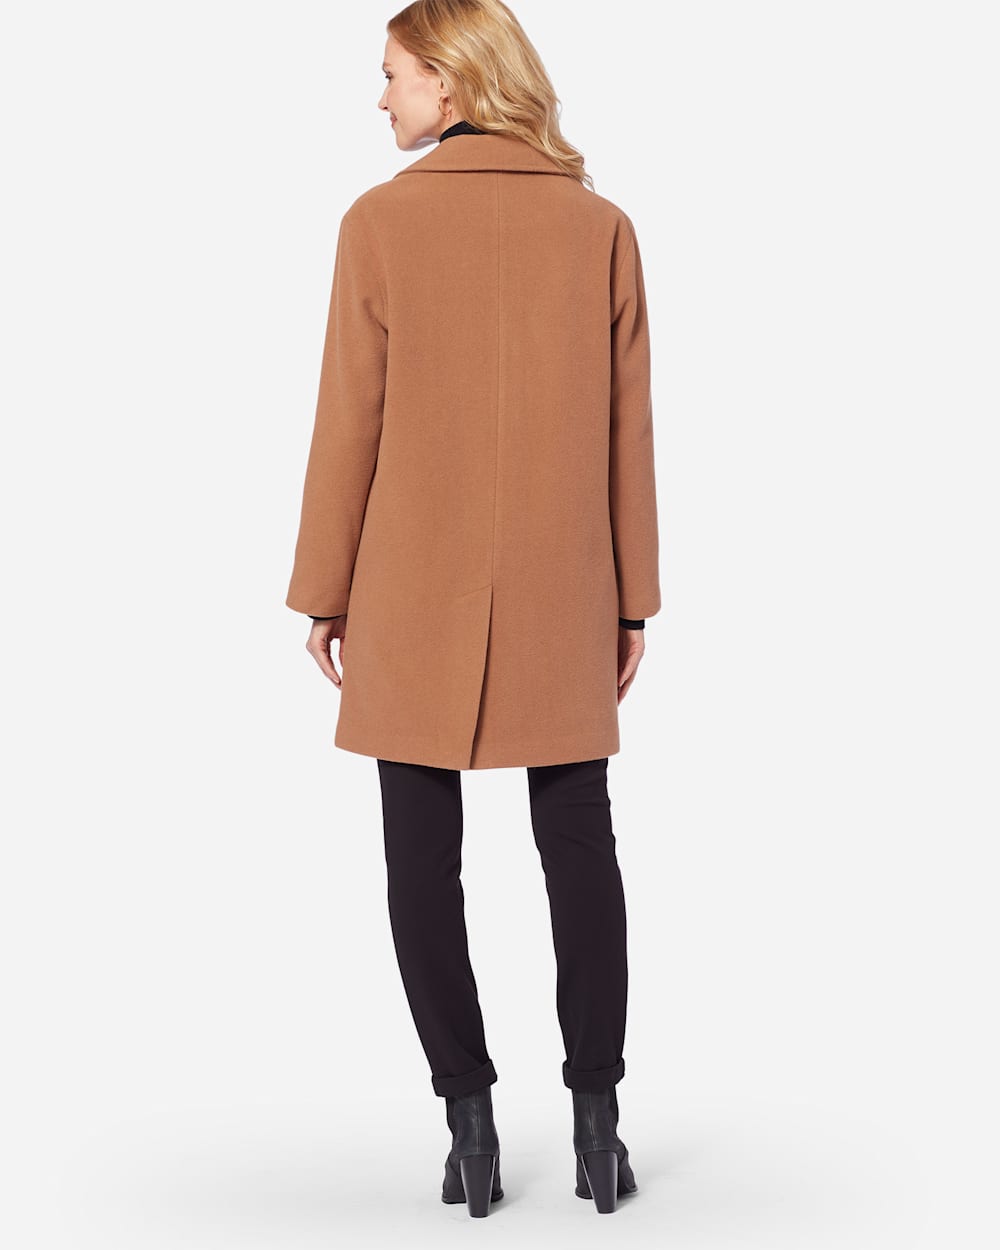 ADDITIONAL VIEW OF WOMEN'S TWO-BUTTON WALKER COAT IN CAMEL image number 3